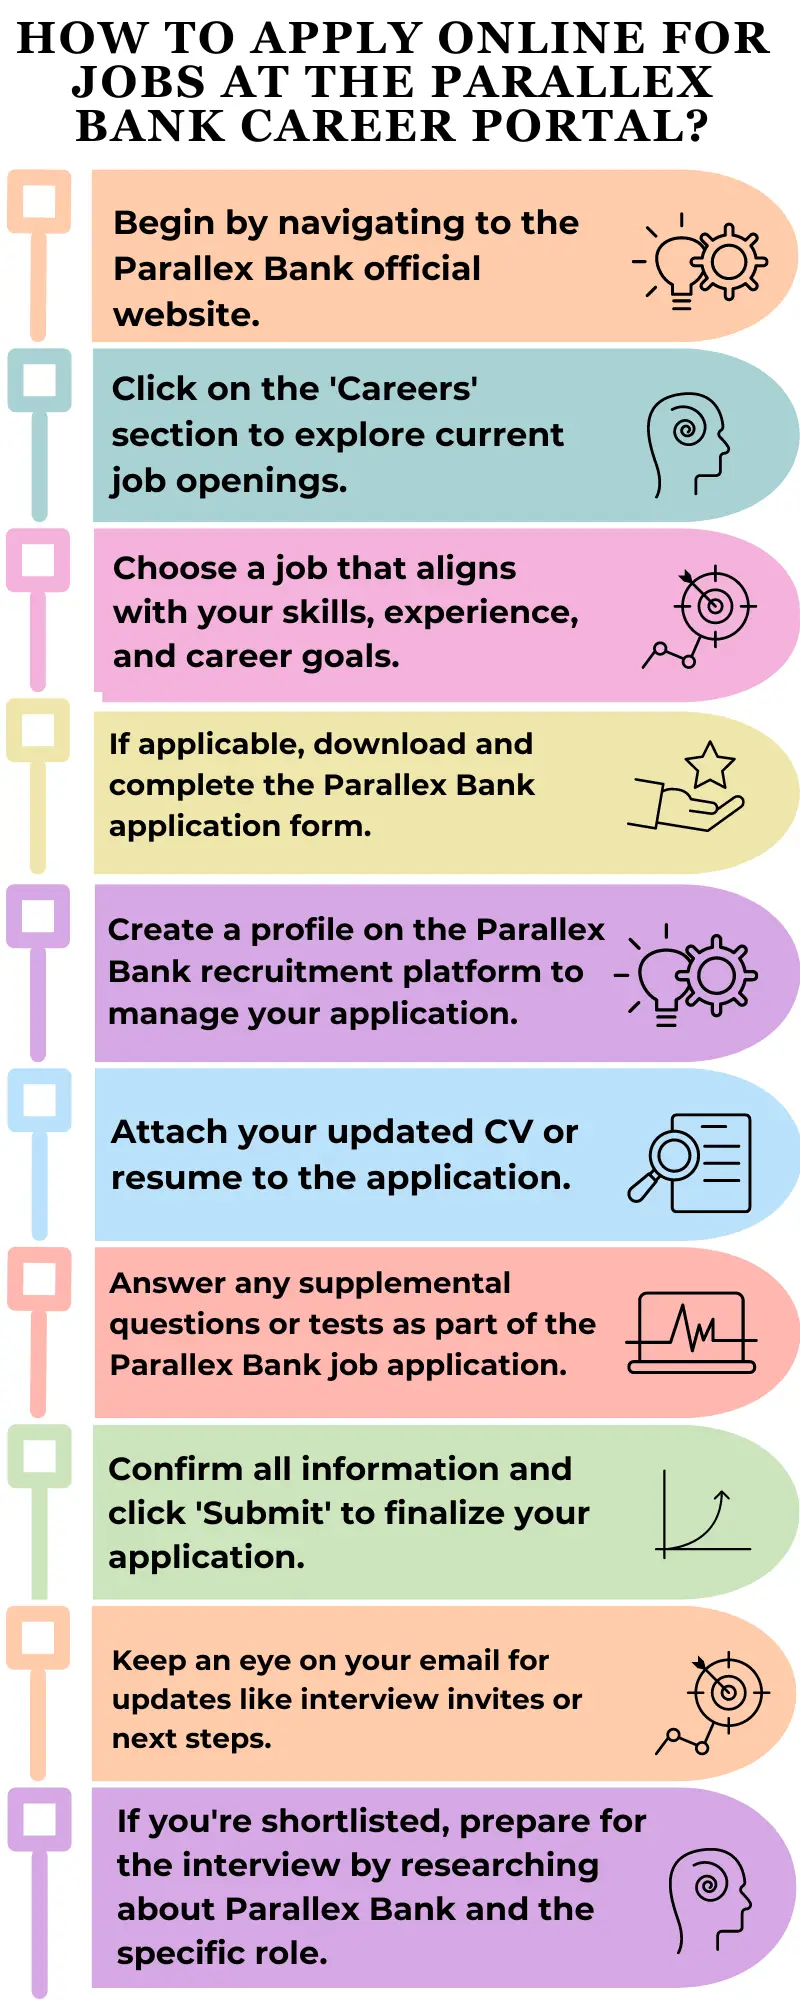 How to Apply Online for Jobs at the Parallex Bank Career Portal?